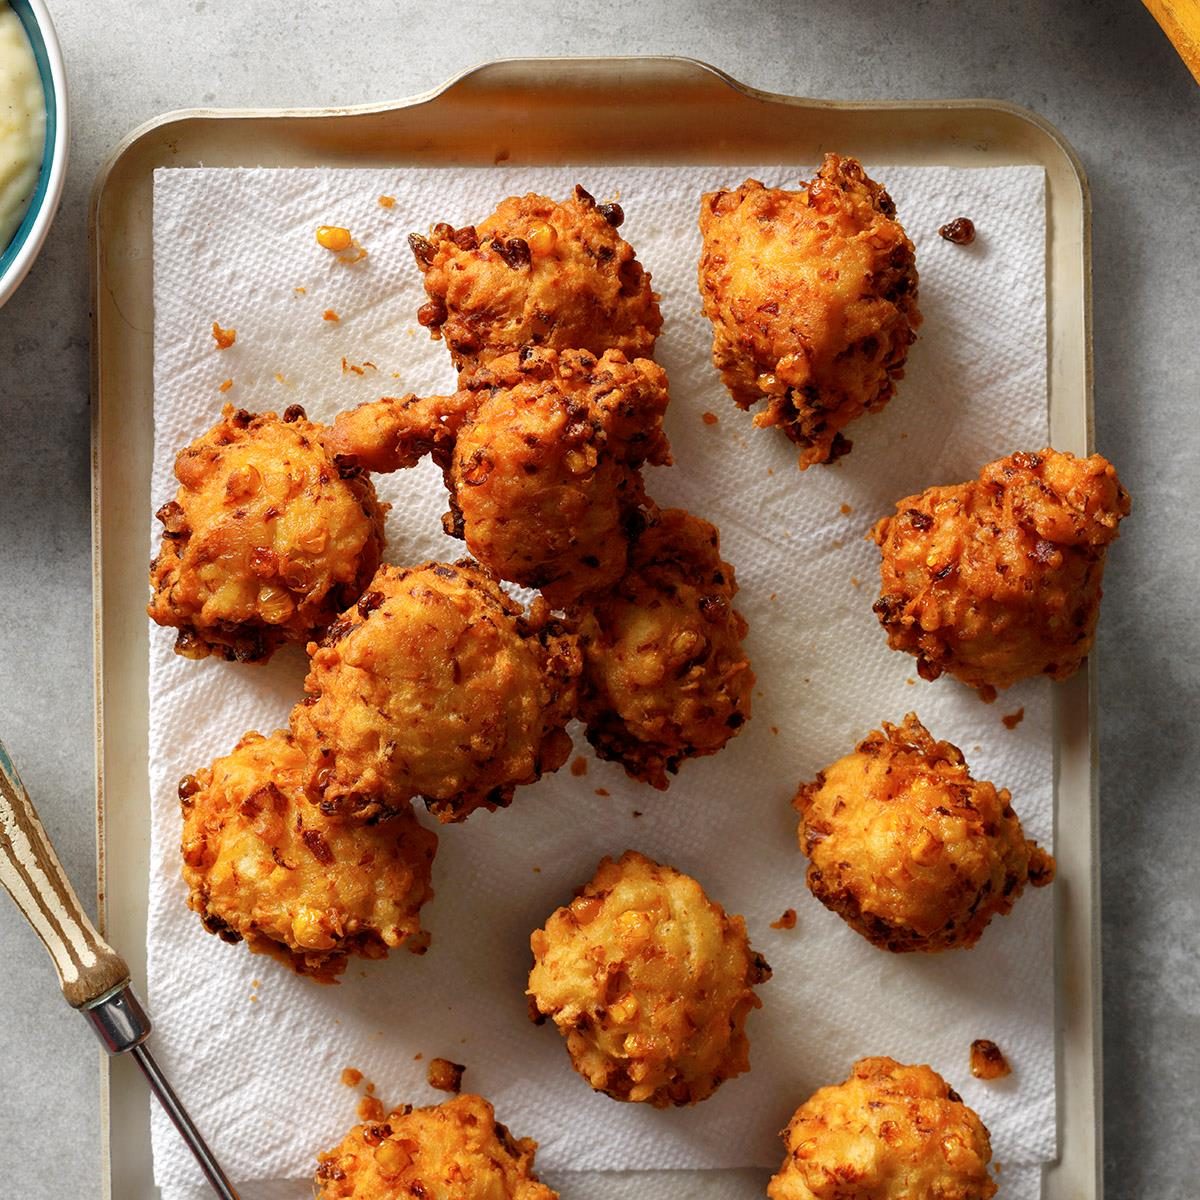 25 Best Deep-Fry Recipes For Any Occasion - Insanely Good